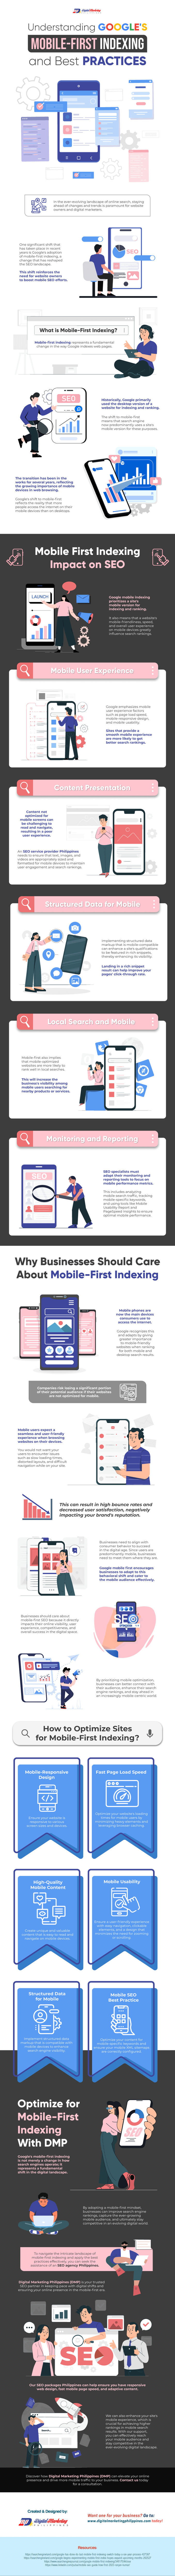 Understanding Google's Mobile-First Indexing and Best Practices Infographic